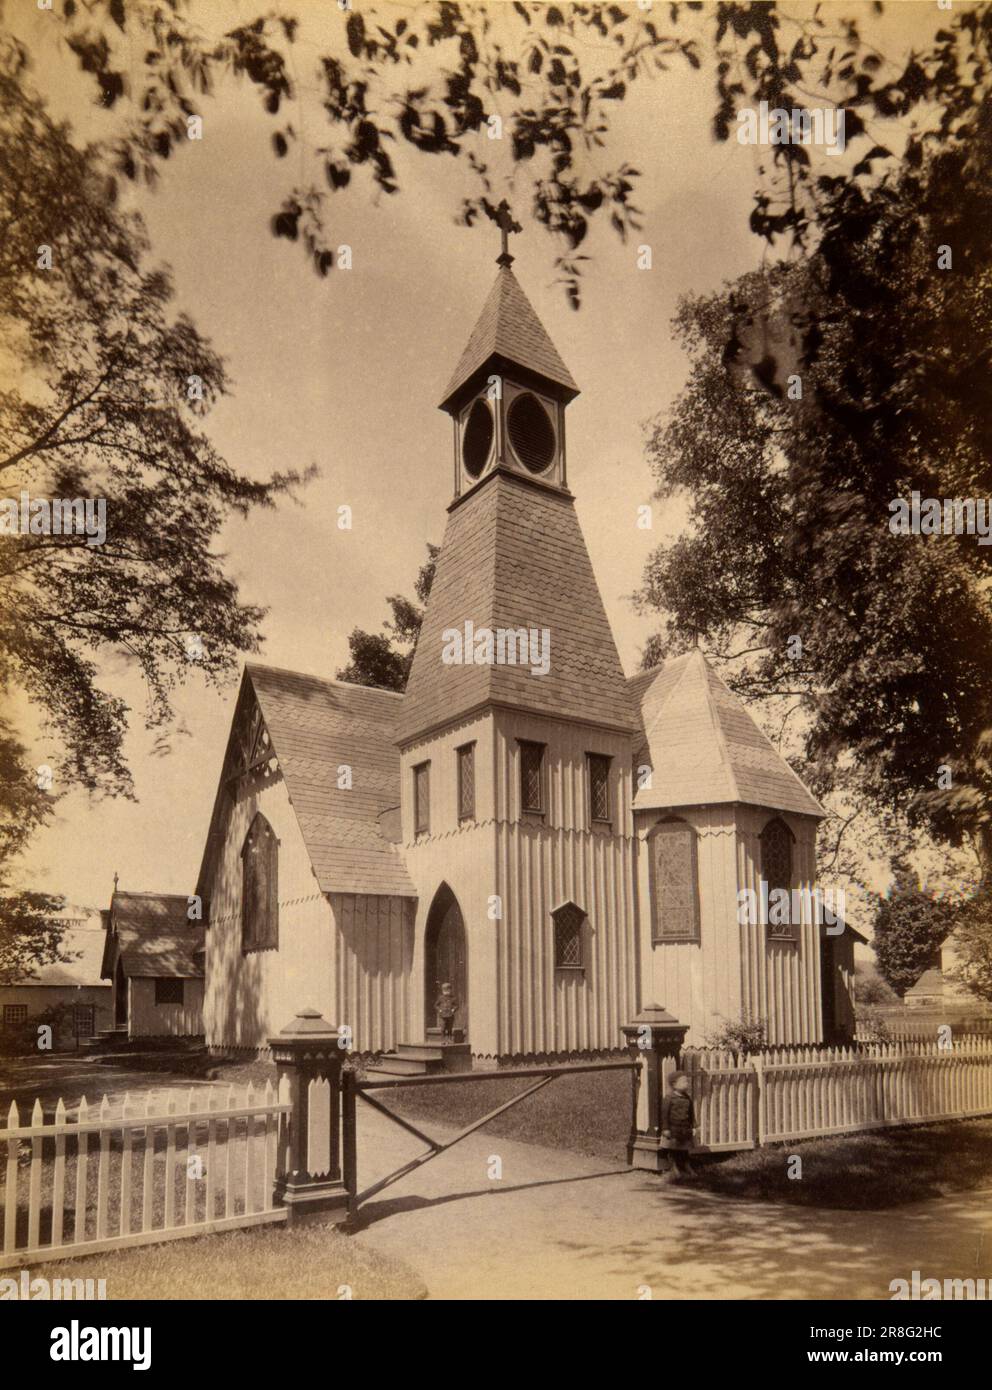 Episcopal Church, from the album Views of Charlestown, New Hampshire 1888 by Gotthelf Pach, active 1880s Stock Photo